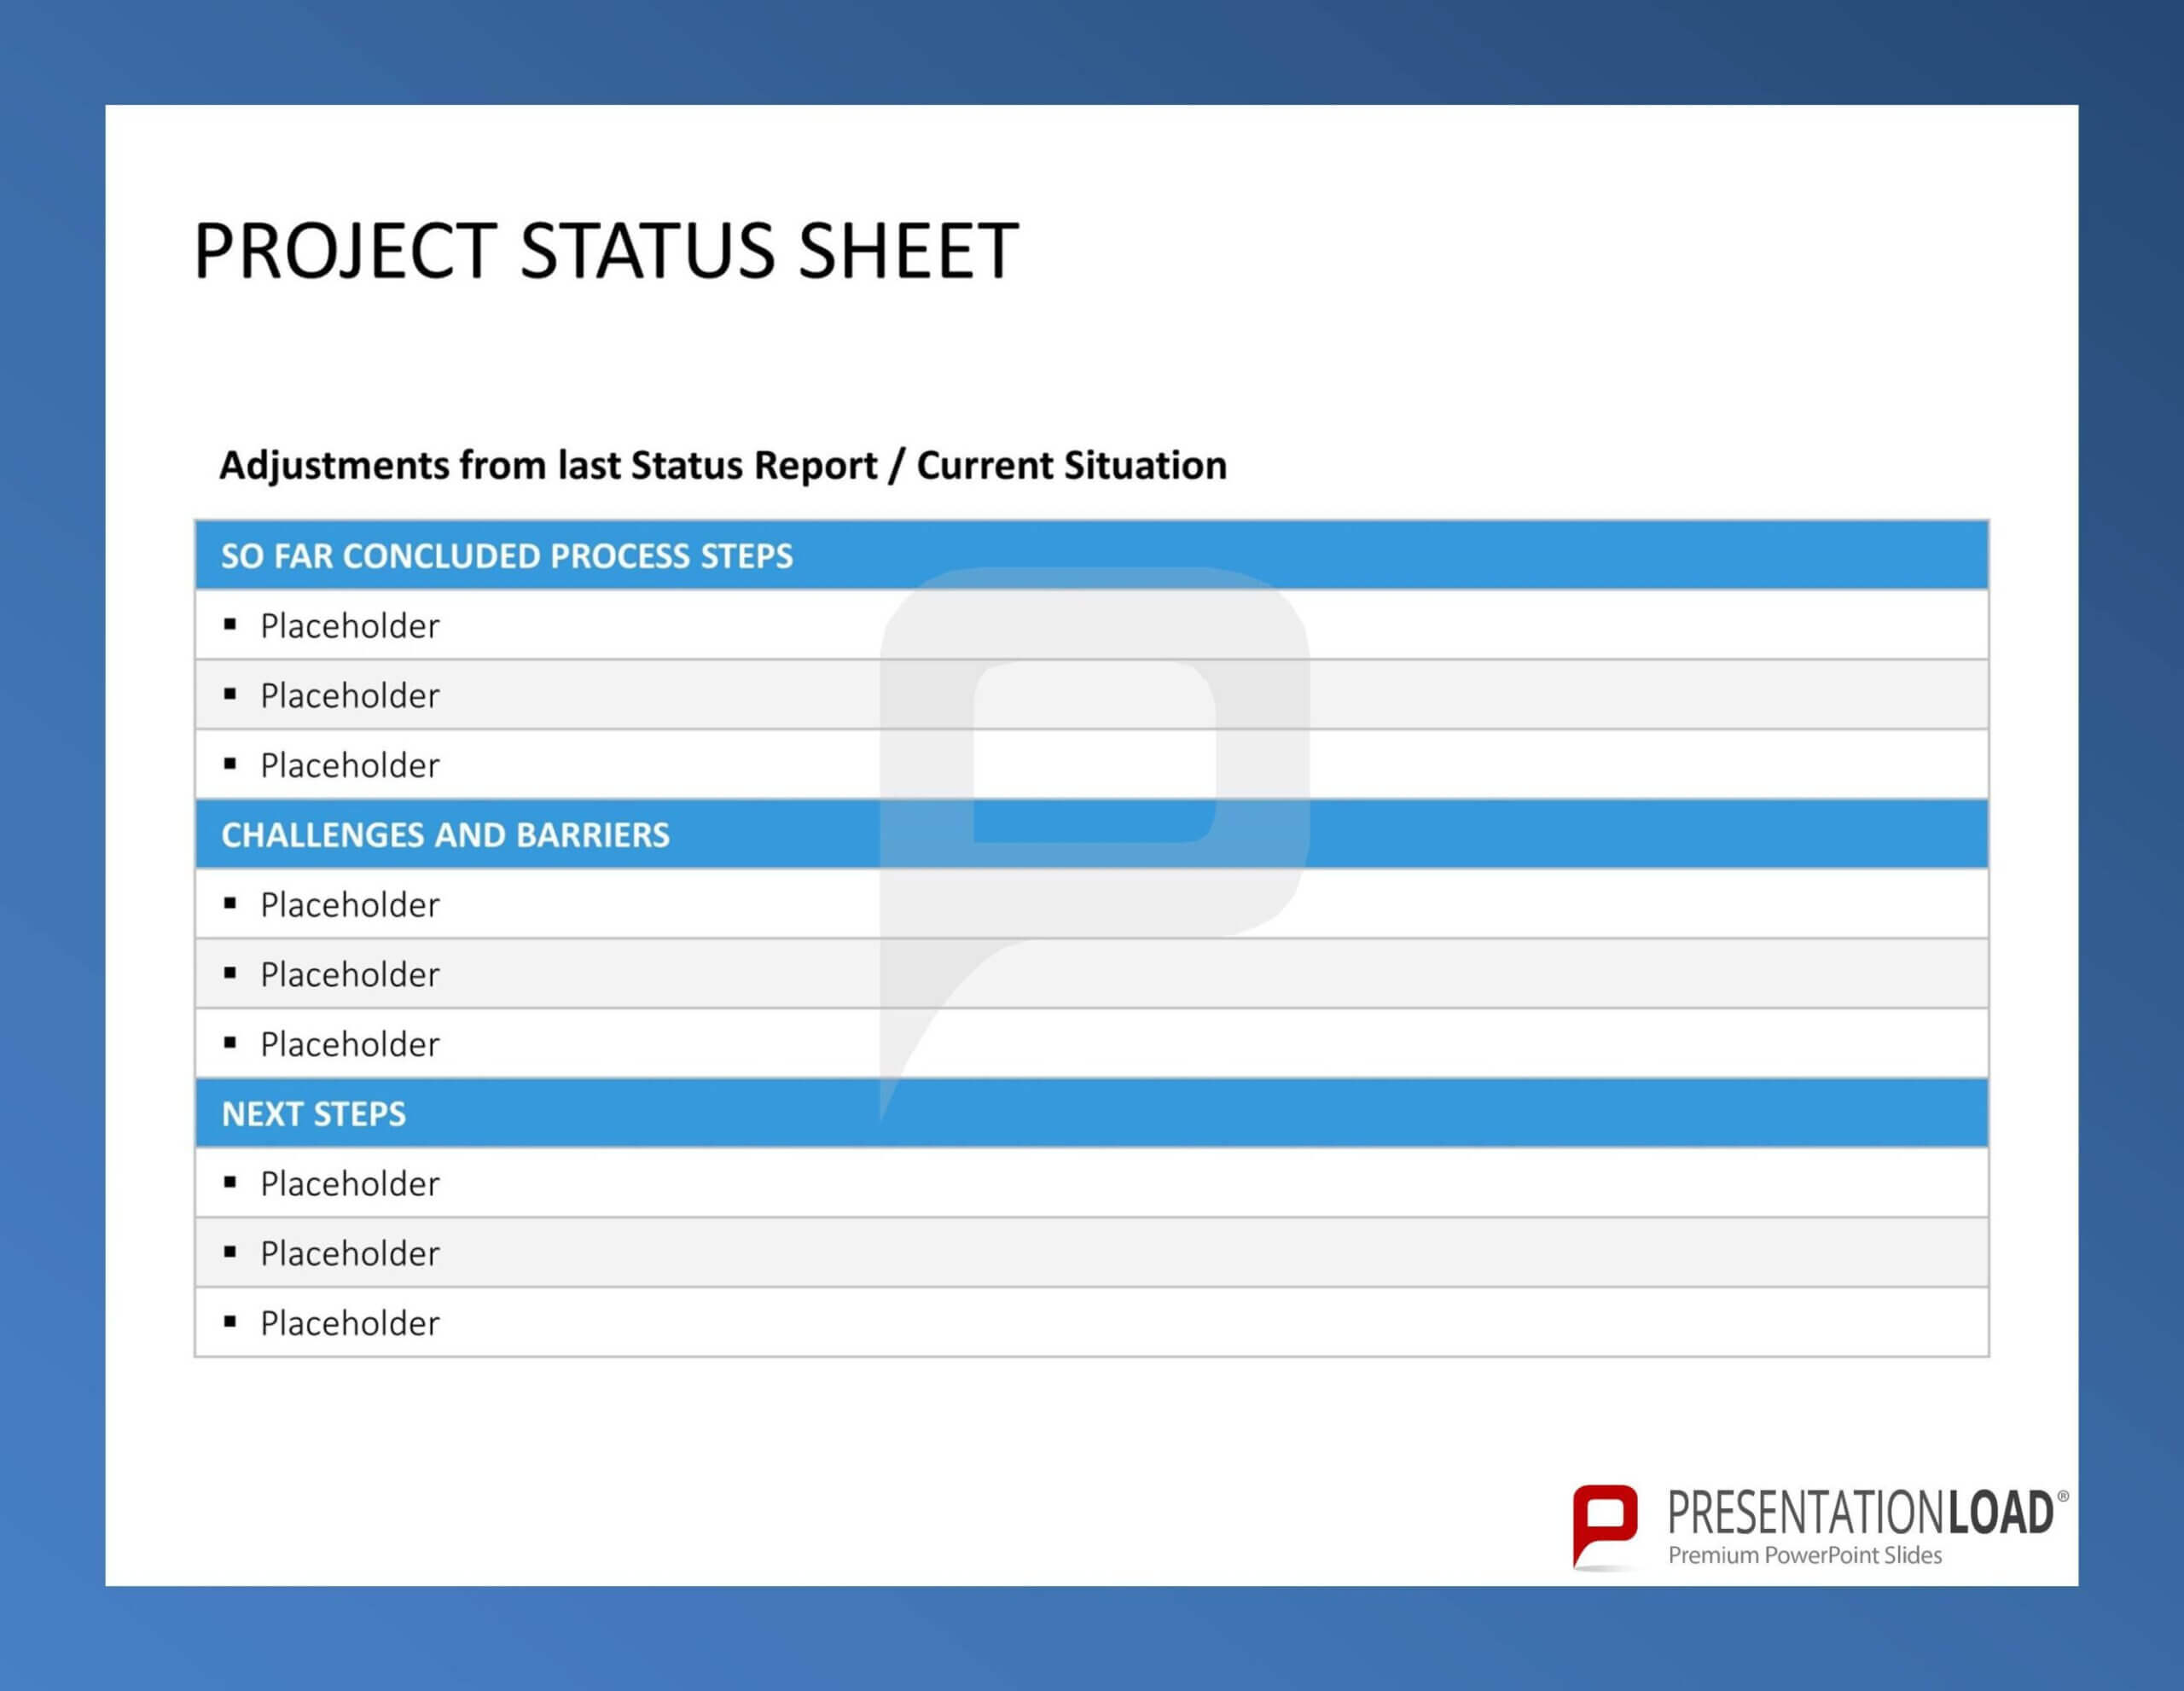 Pinpresentationload On Quality Management // Powerpoint Within Weekly Project Status Report Template Powerpoint